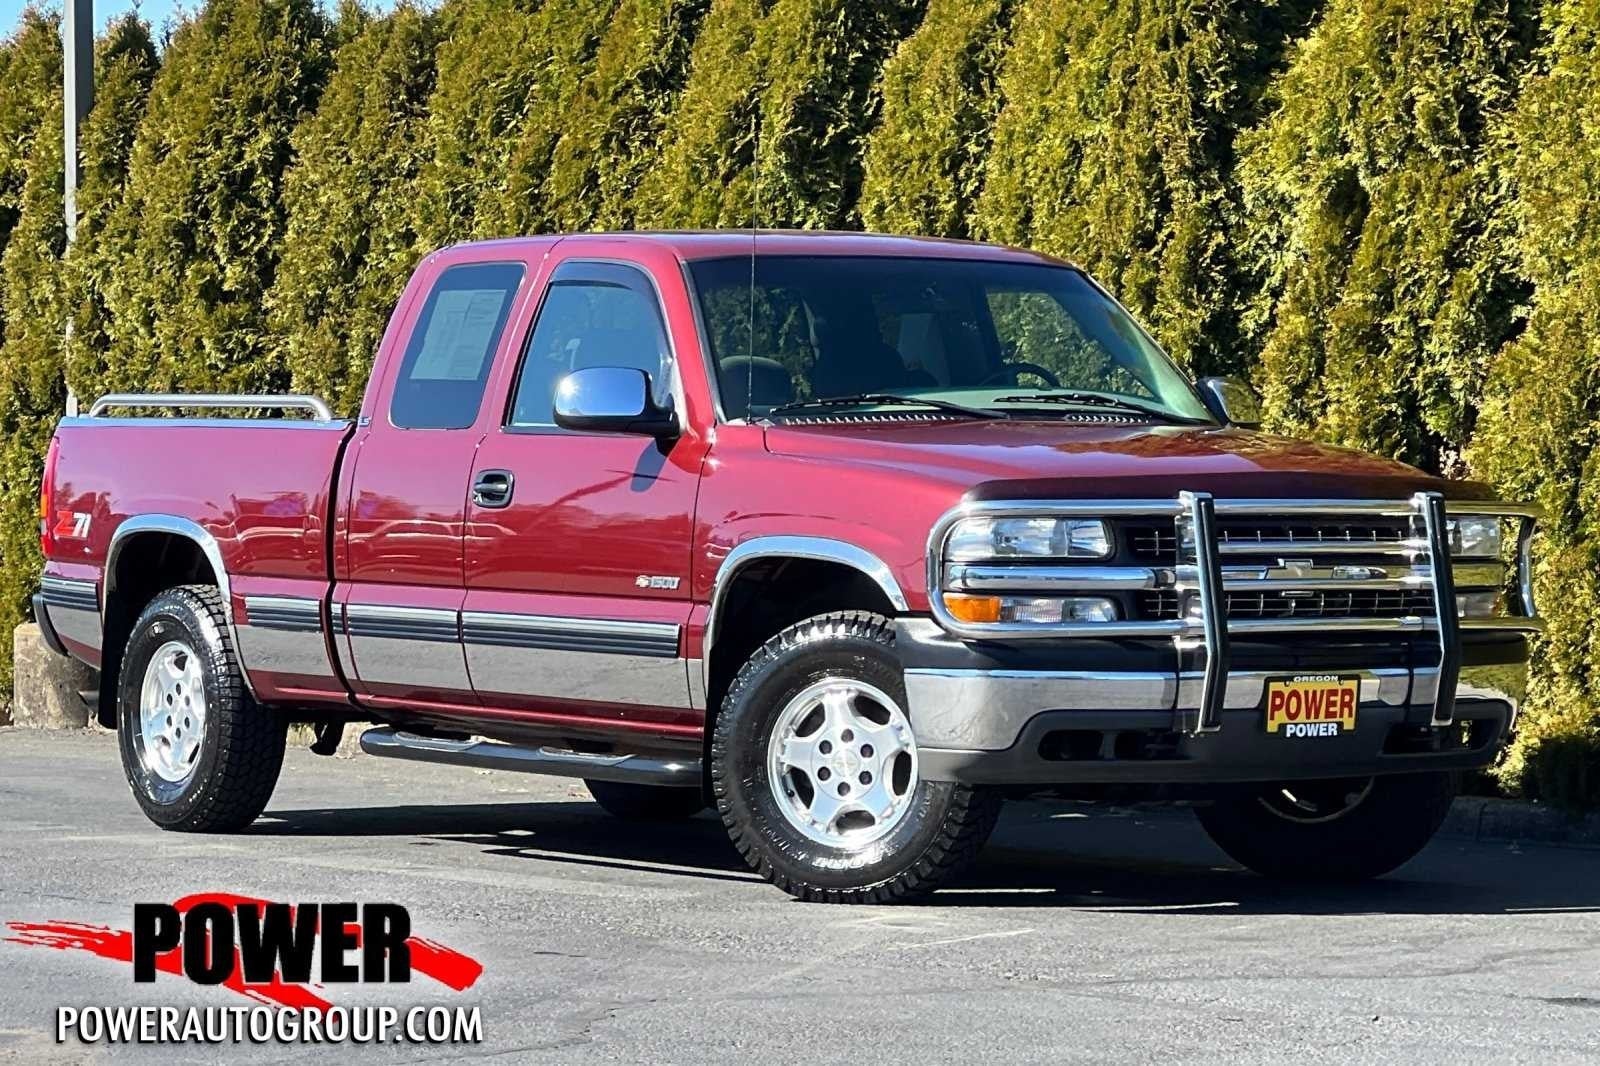 1999 Chevrolet Silverado 1500 LS 4X4 - Low Mile, Local One Owner!